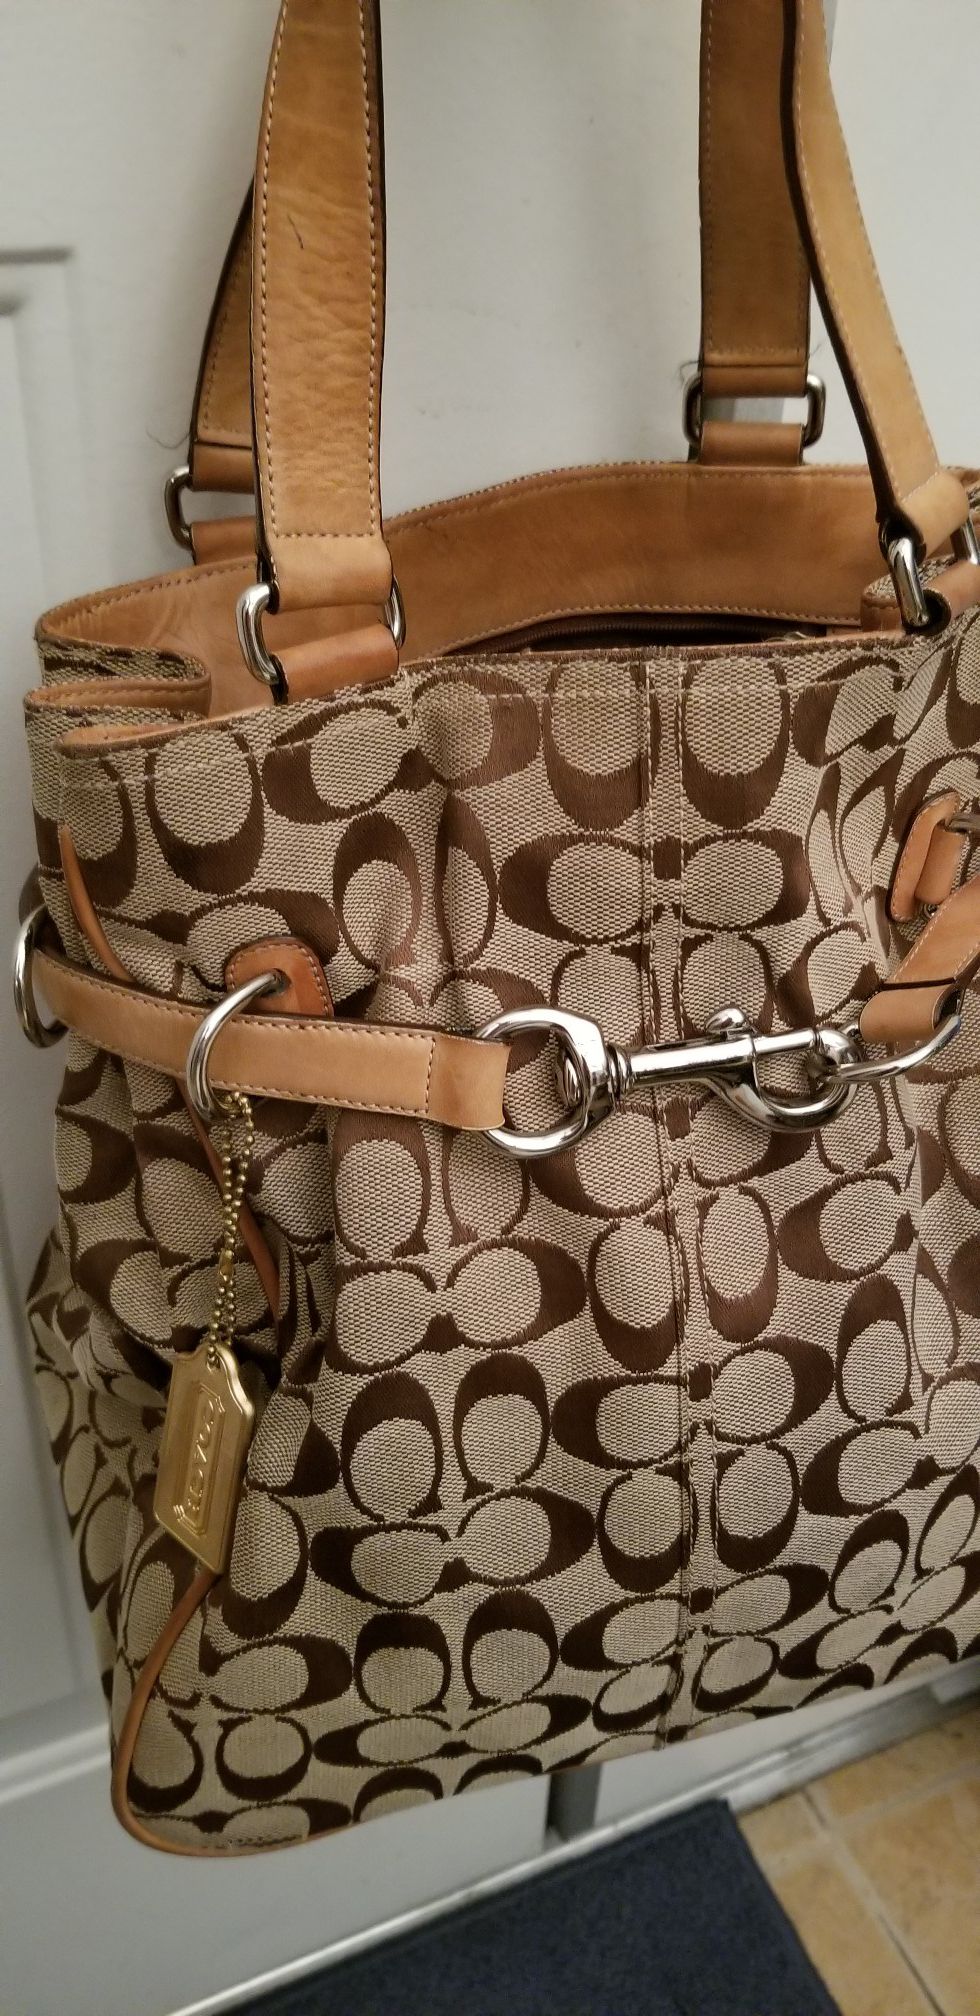 Handbag by Coach. Used good condition. $22Canvas & leather.Style Belted Carryall Tote.Clean just has some Use, can be nicely cleaned w Leather cleaner